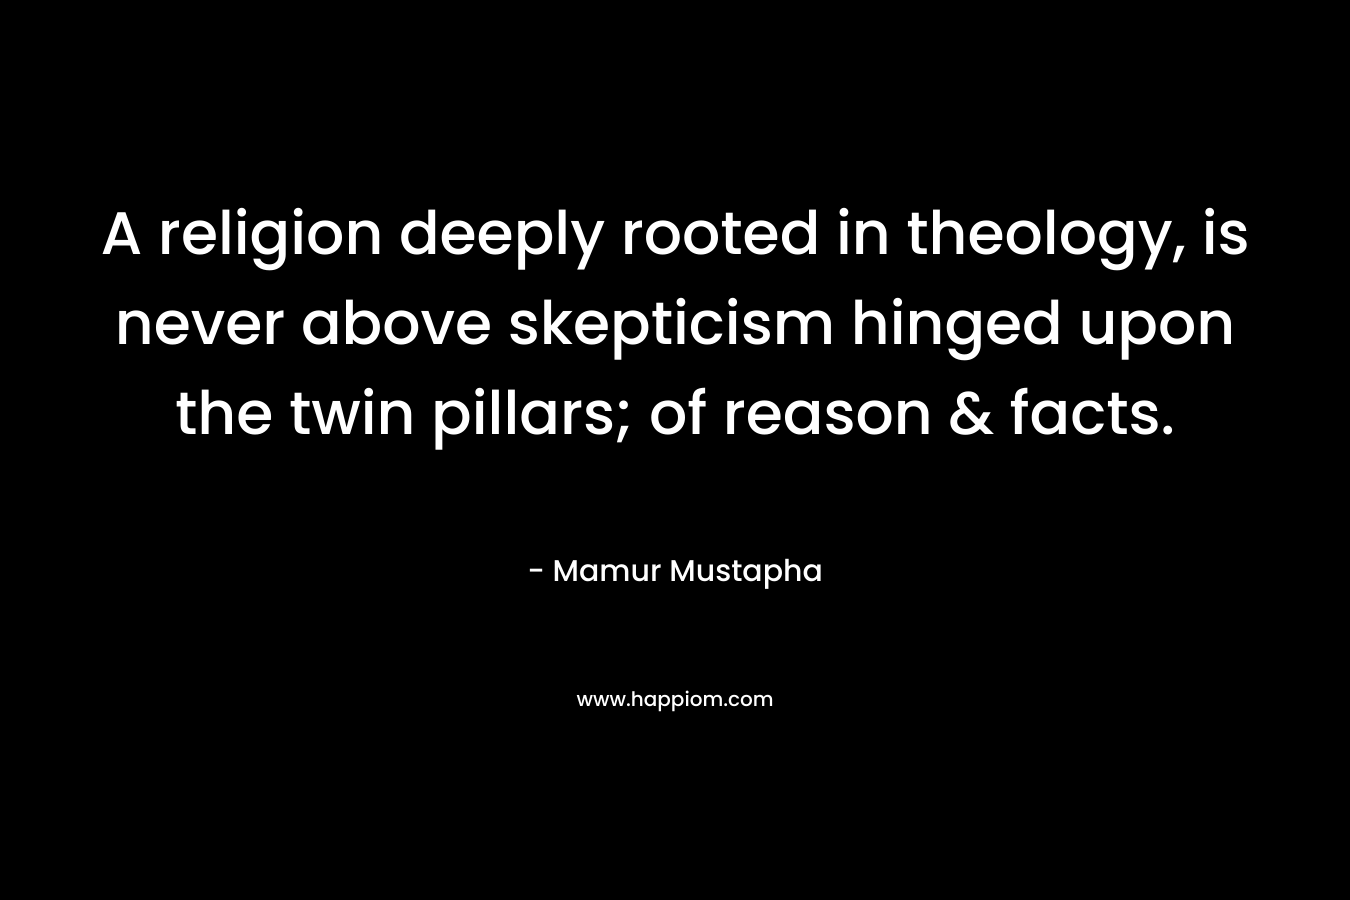 A religion deeply rooted in theology, is never above skepticism hinged upon the twin pillars; of reason & facts. – Mamur Mustapha